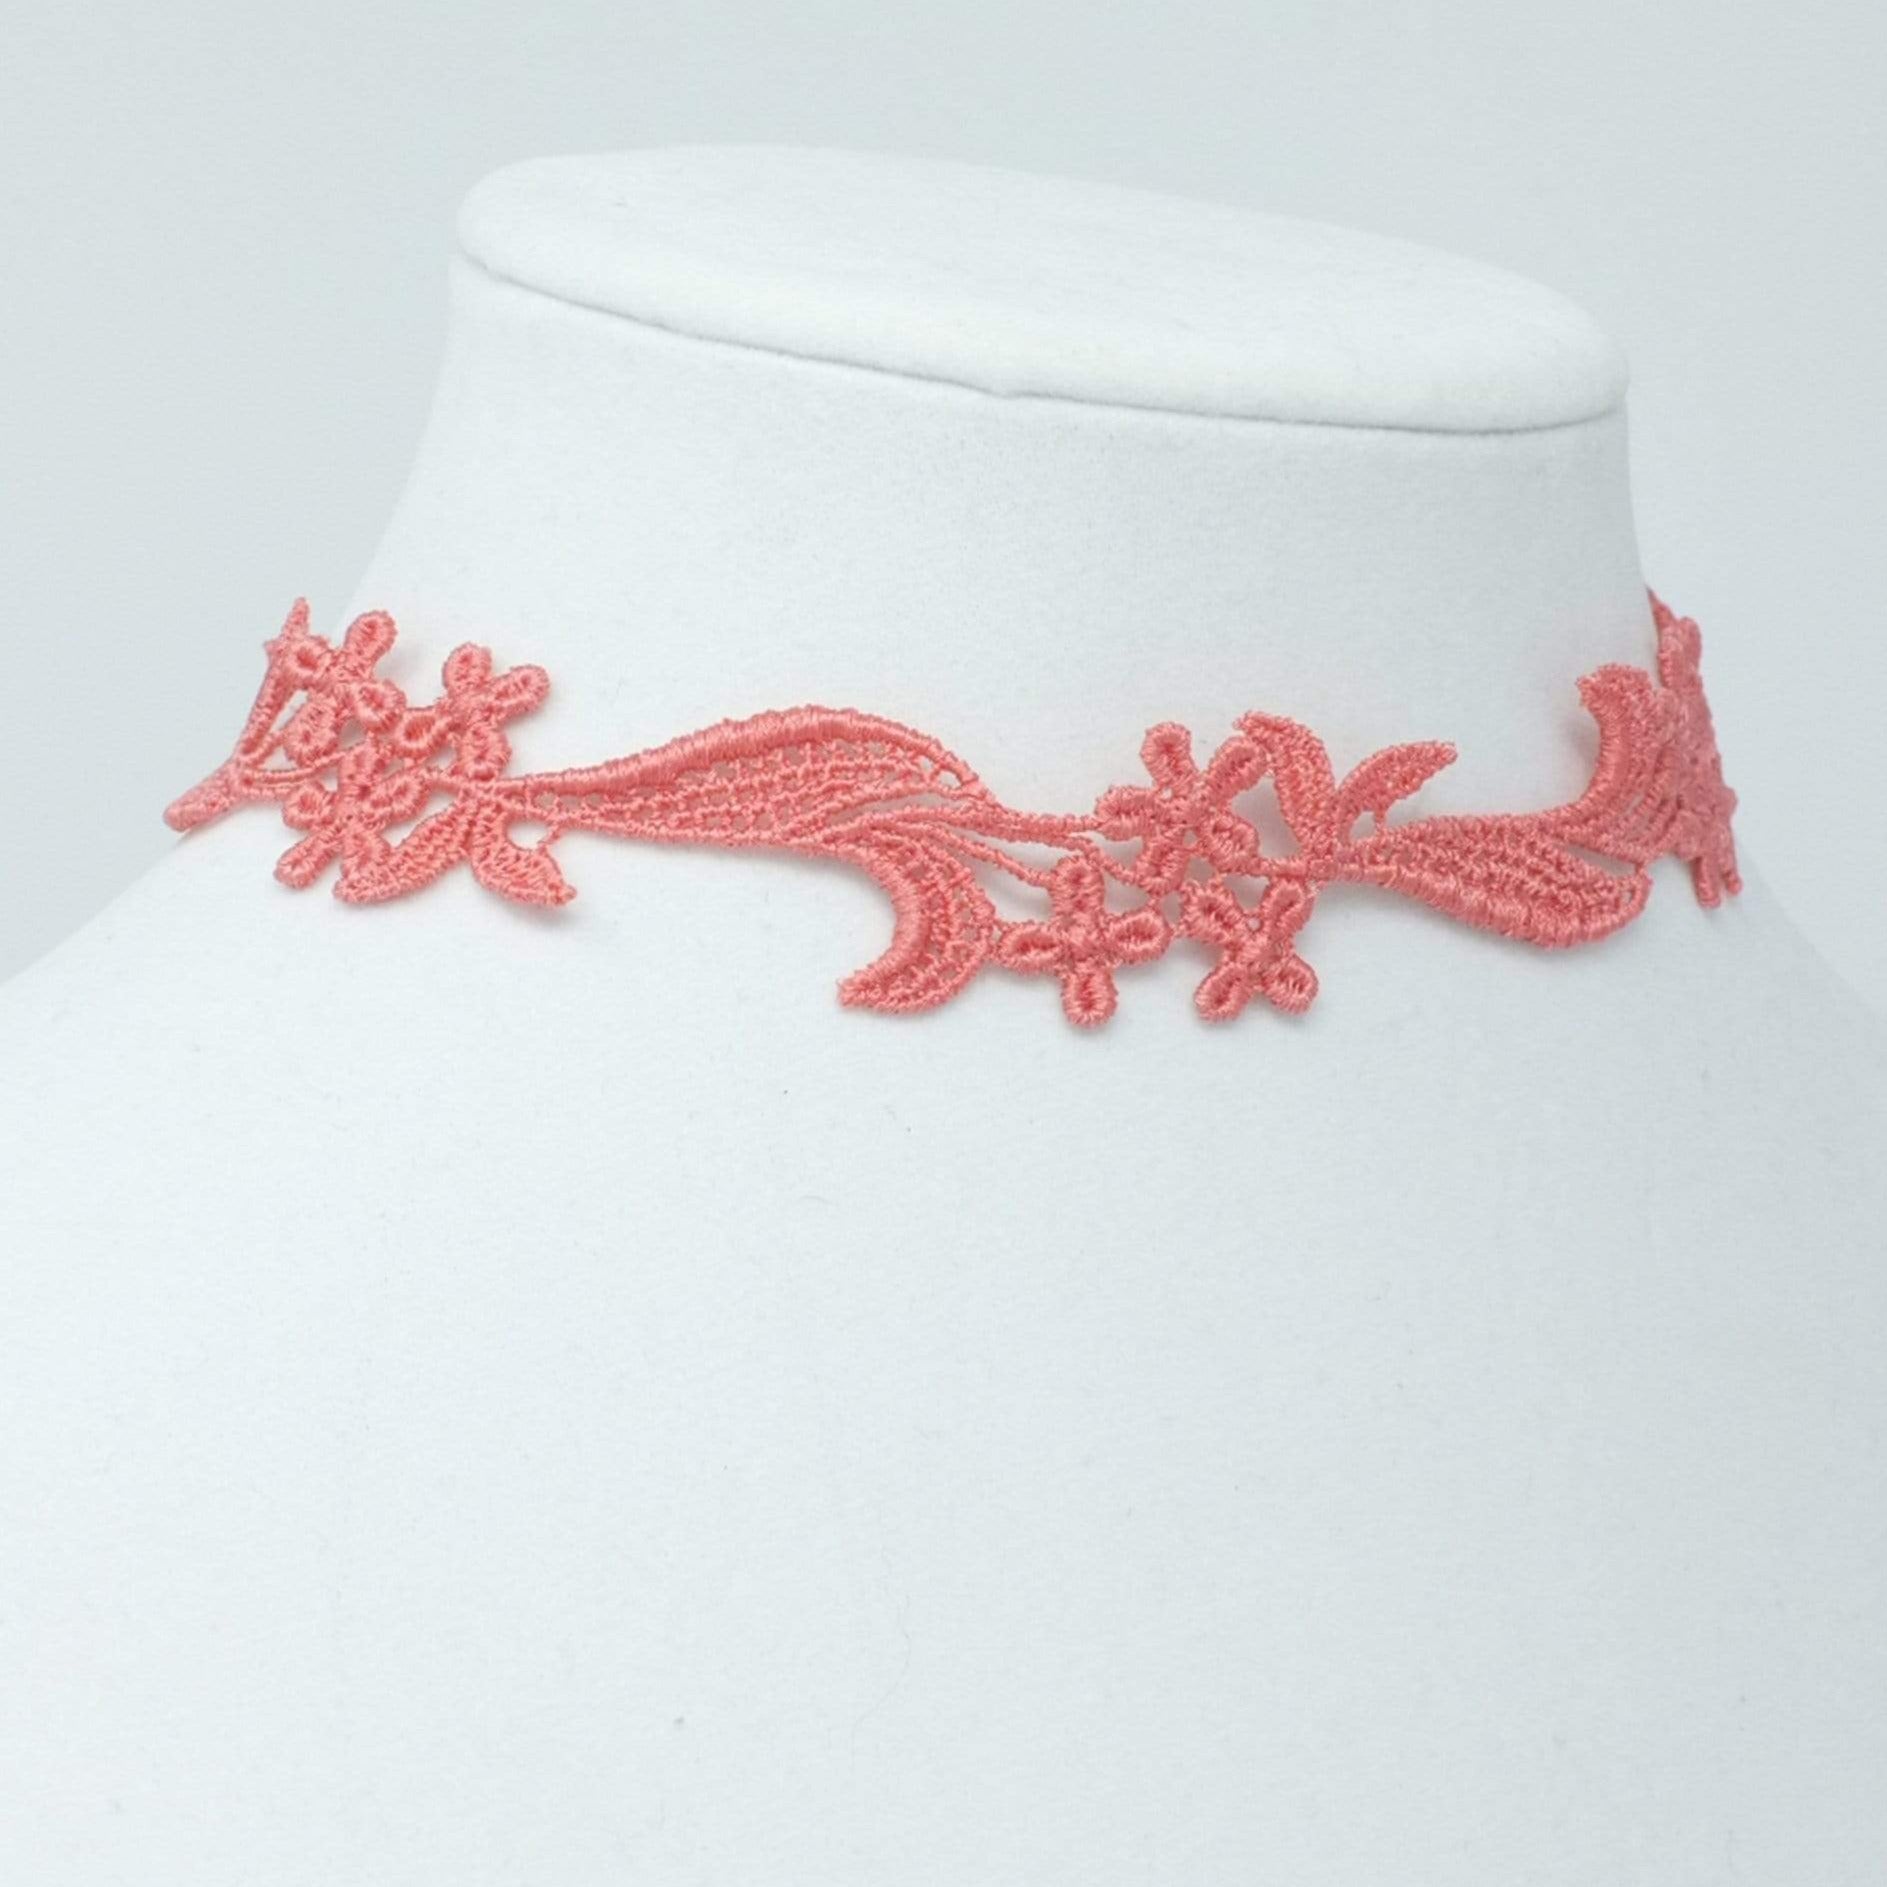 Coral Pink Lace Choker Necklace with floral design